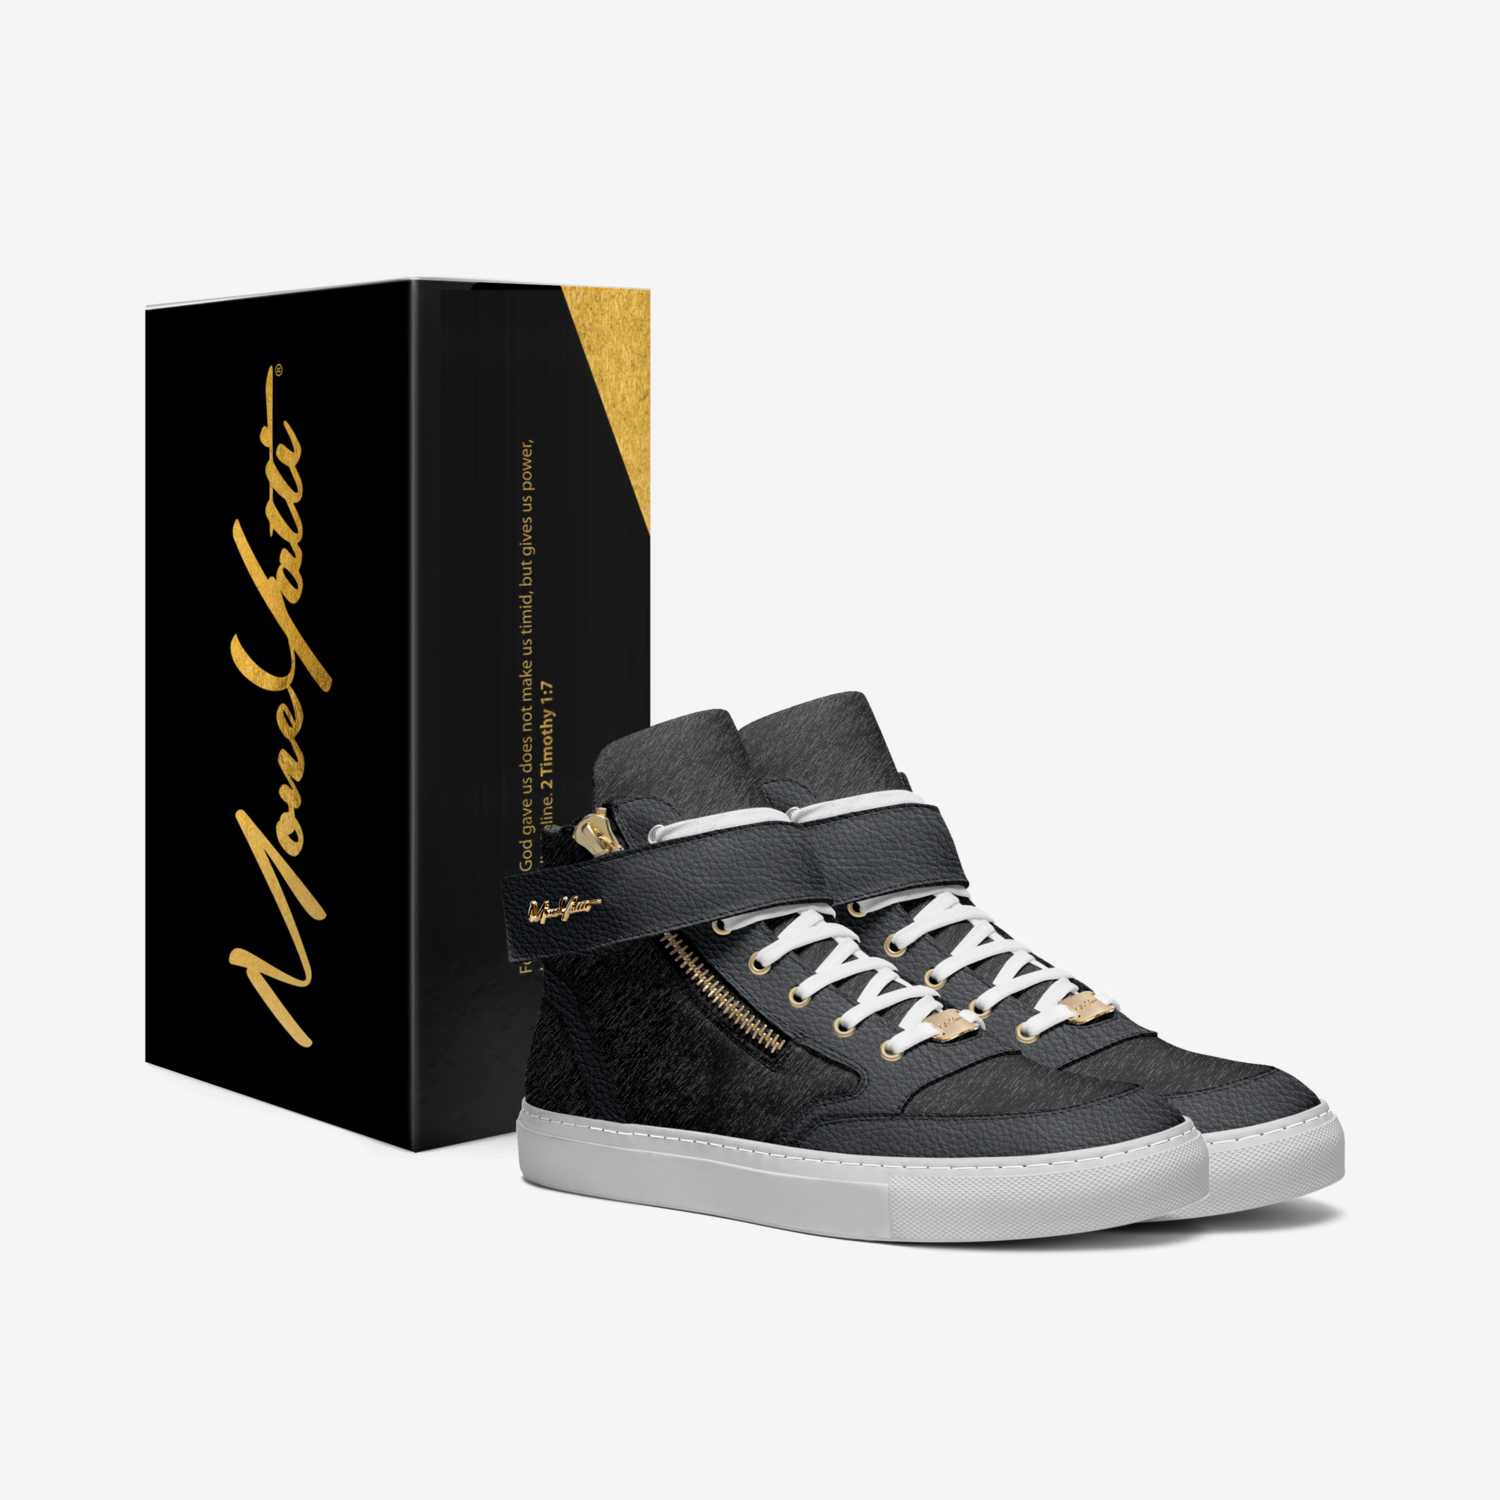 MCLASSIC PONY 003 custom made in Italy shoes by Moneyatti Brand | Box view